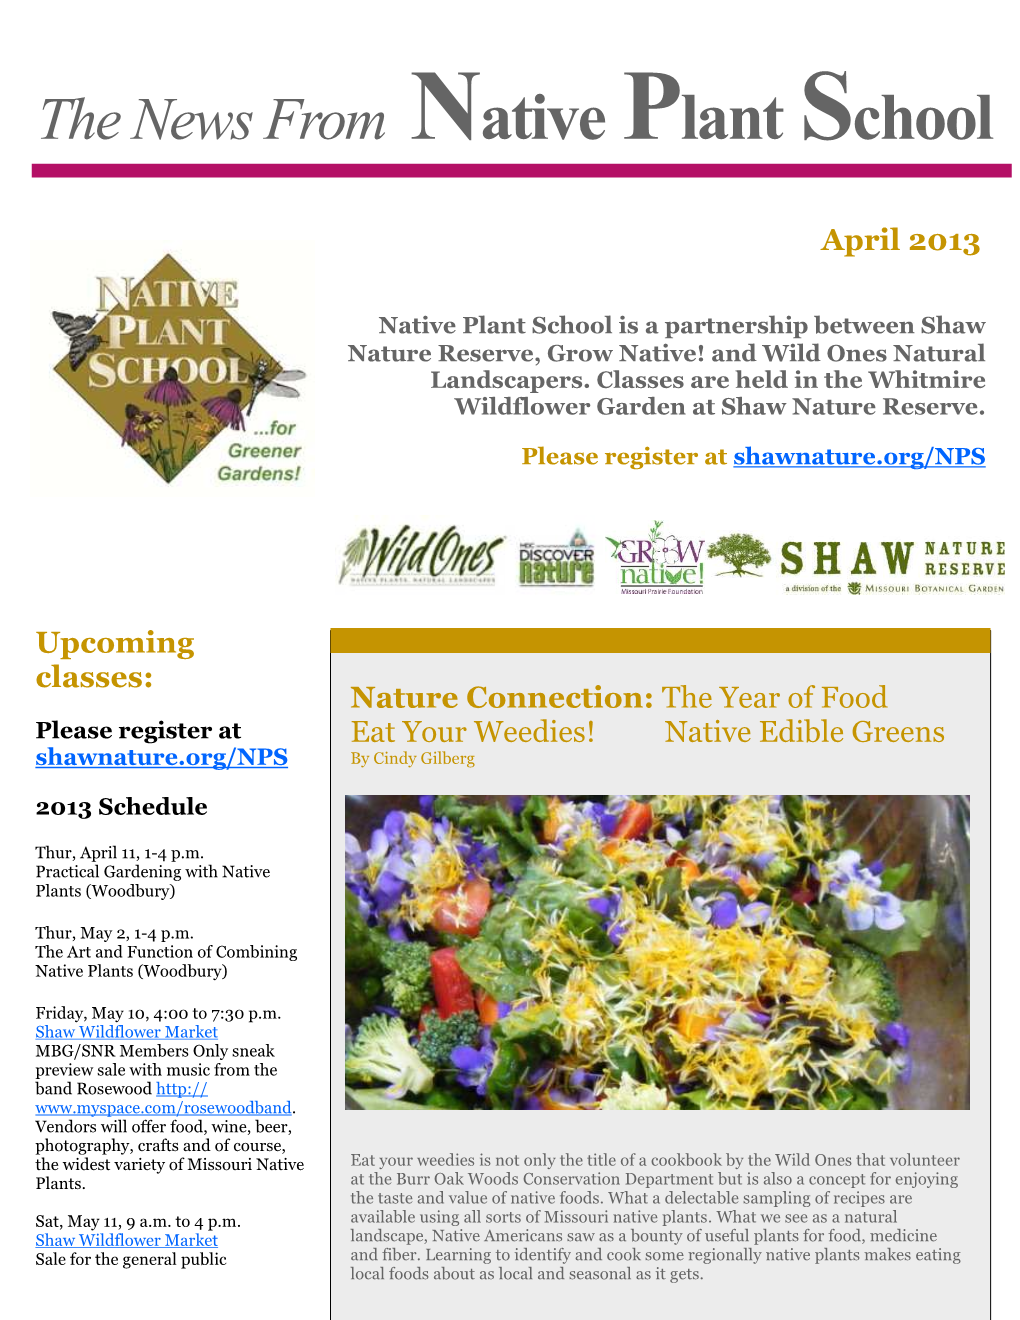 The News from Native Plant School